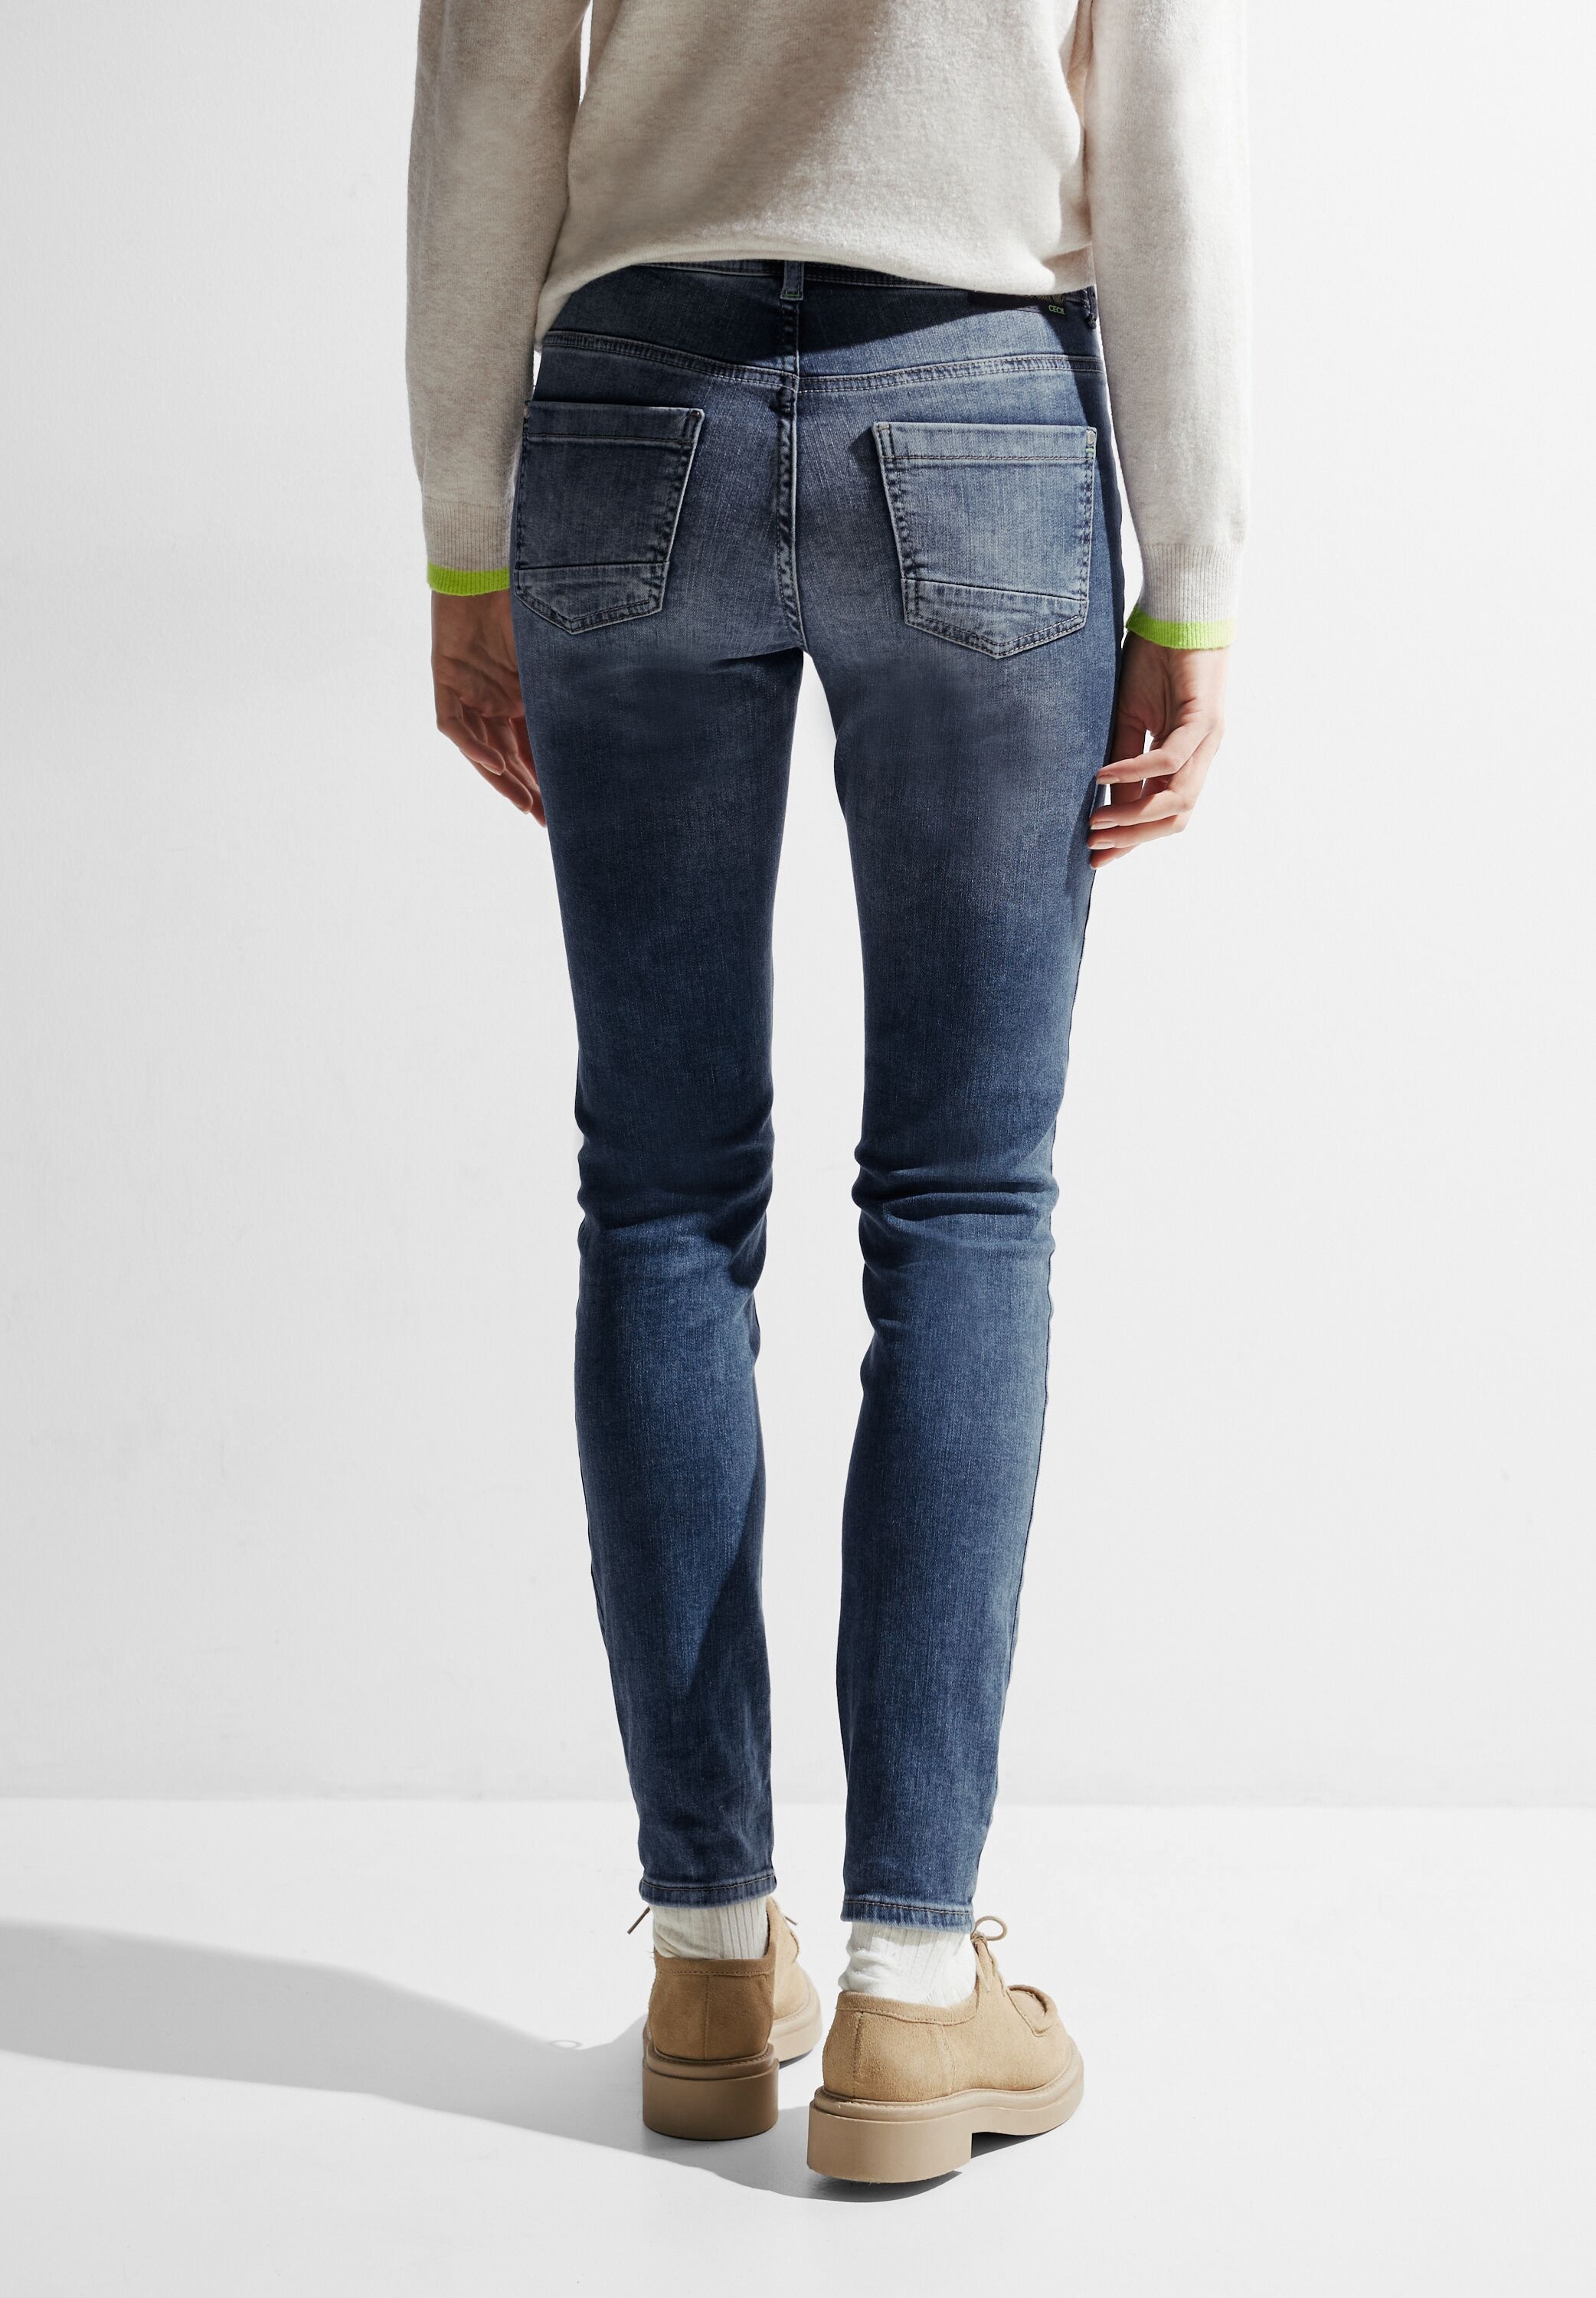 Cecil Slim-fit-Jeans »Vicky Authentic«, in mittelblauer Waschung